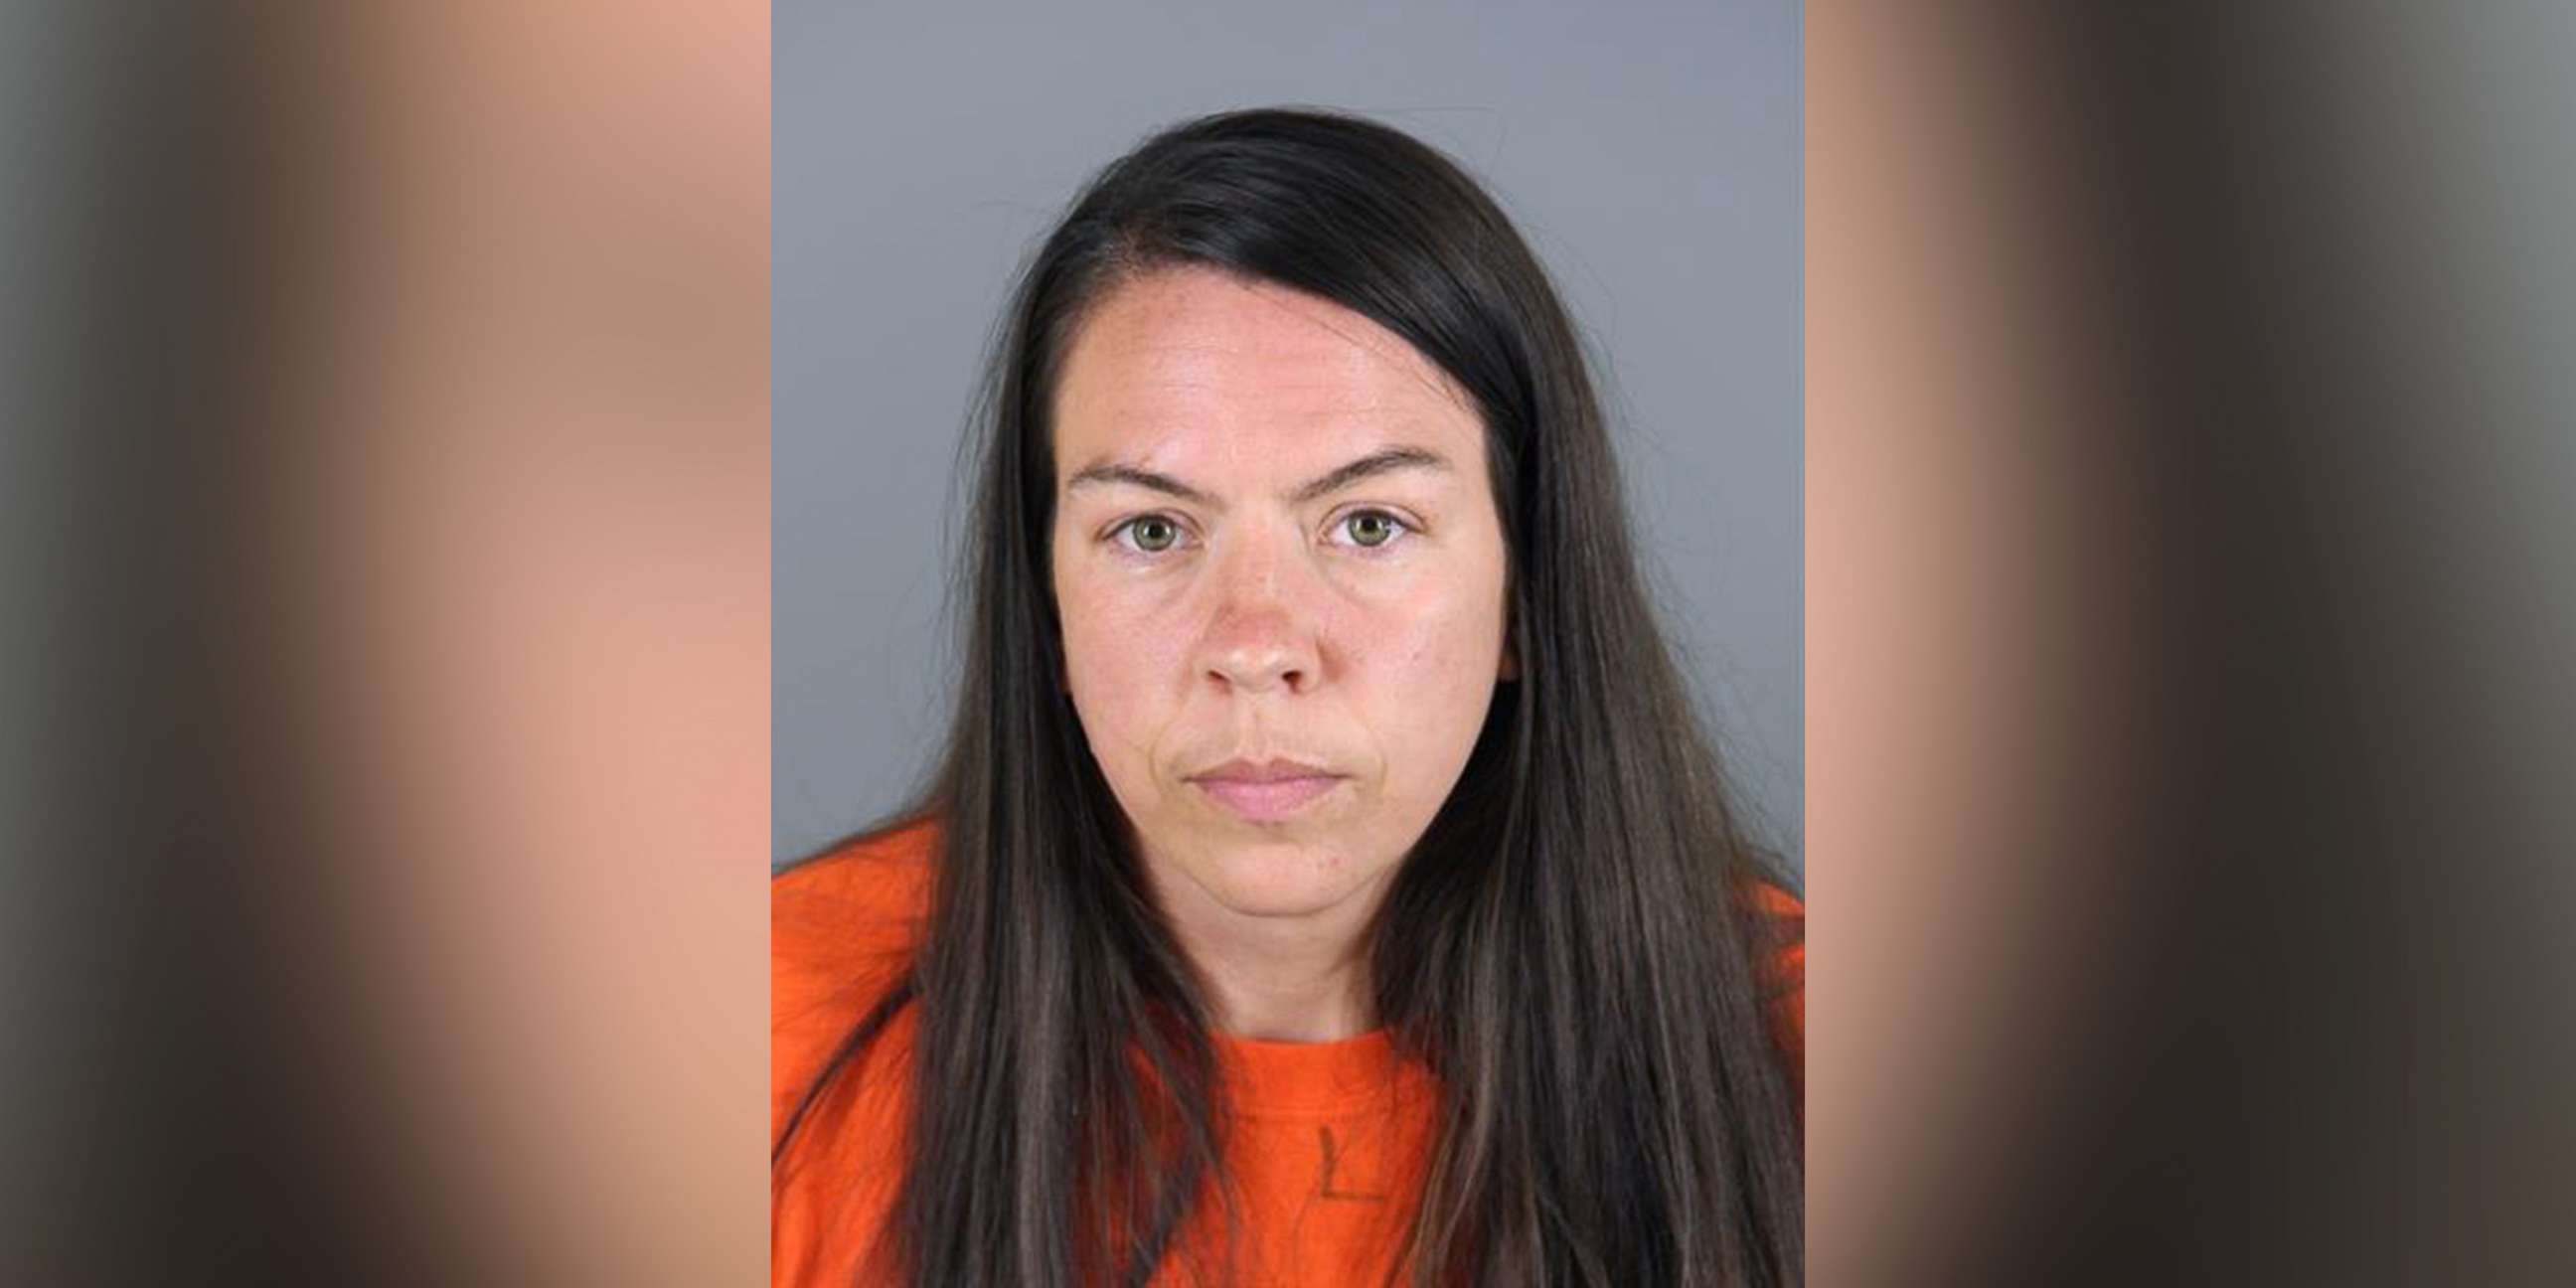 PHOTO: Jessy Kurczewski, 37, is accused of killing her friend by poisoning her with eyedrops, in 2018 in Wisconsin.